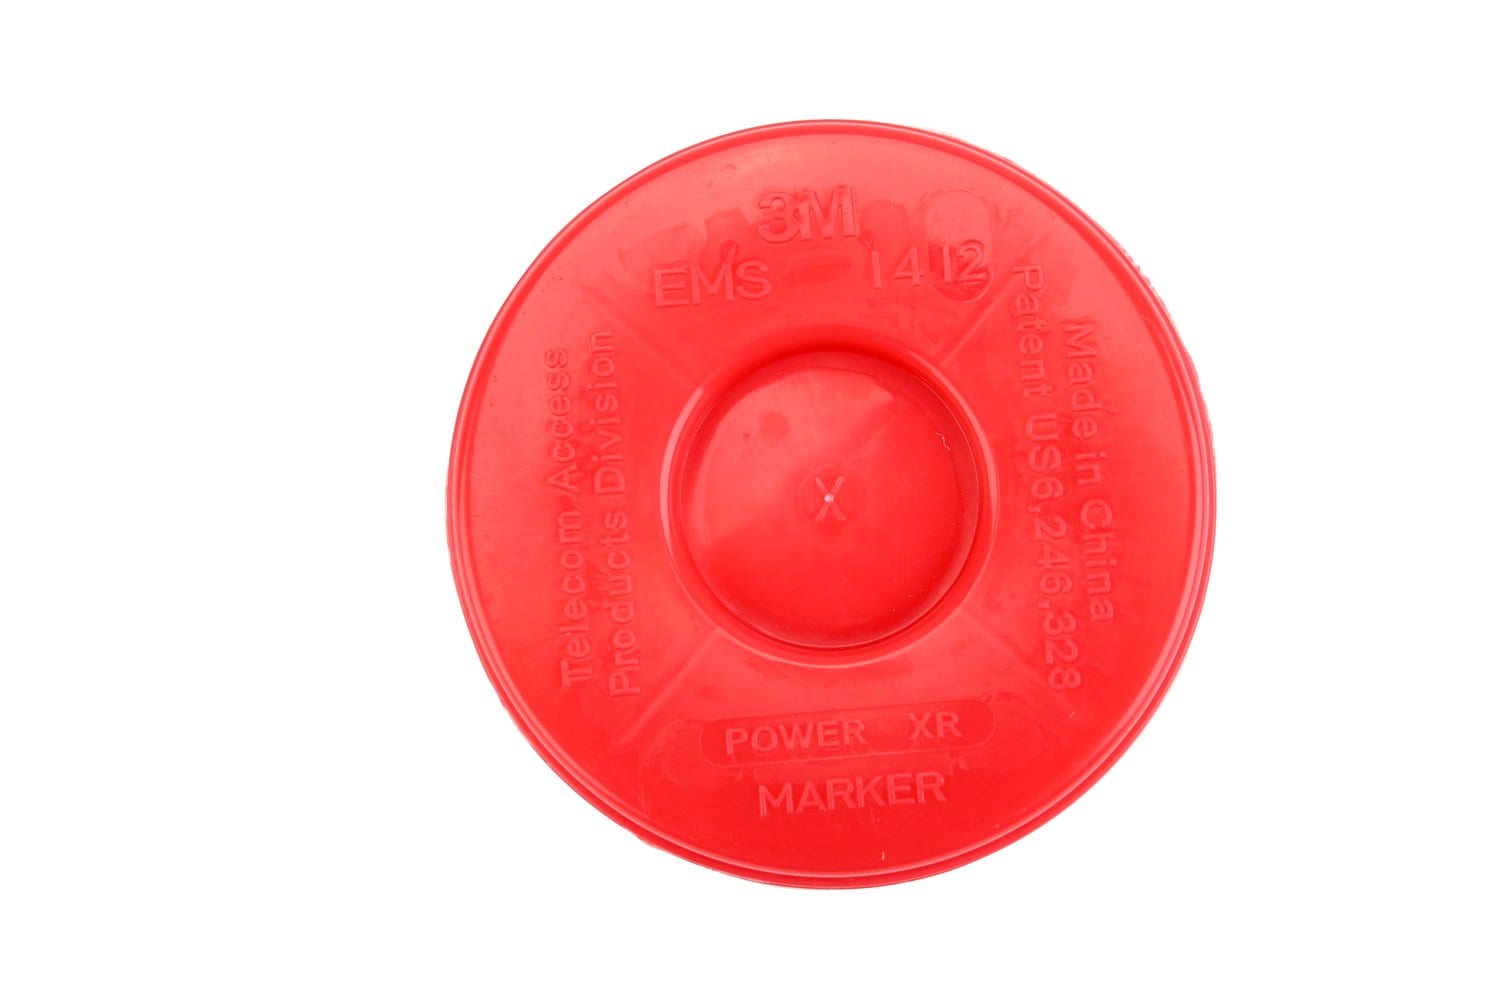 7100178429 - 3M Disk Marker 1413-XR/ID, 5 ft Range, Water, Not for Direct Bury,
210/Case